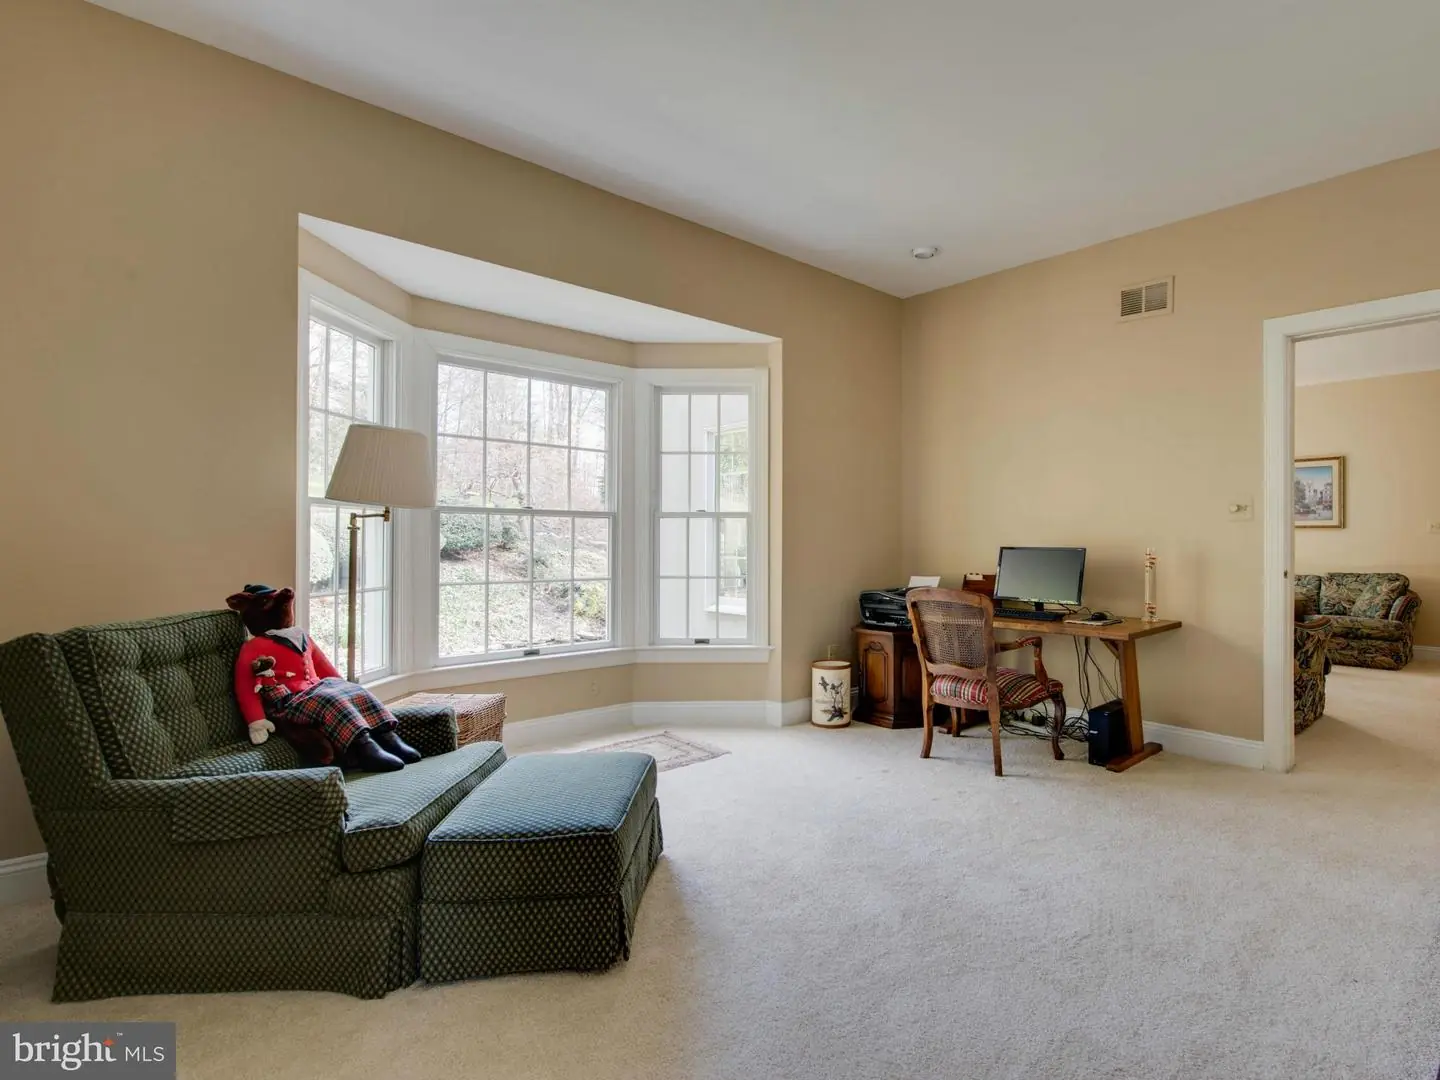 1001892497-300643100341-2021-09-06-13-21-28  |   | Fairfax Station Delaware Real Estate For Sale | MLS# 1001892497  - Best of Northern Virginia